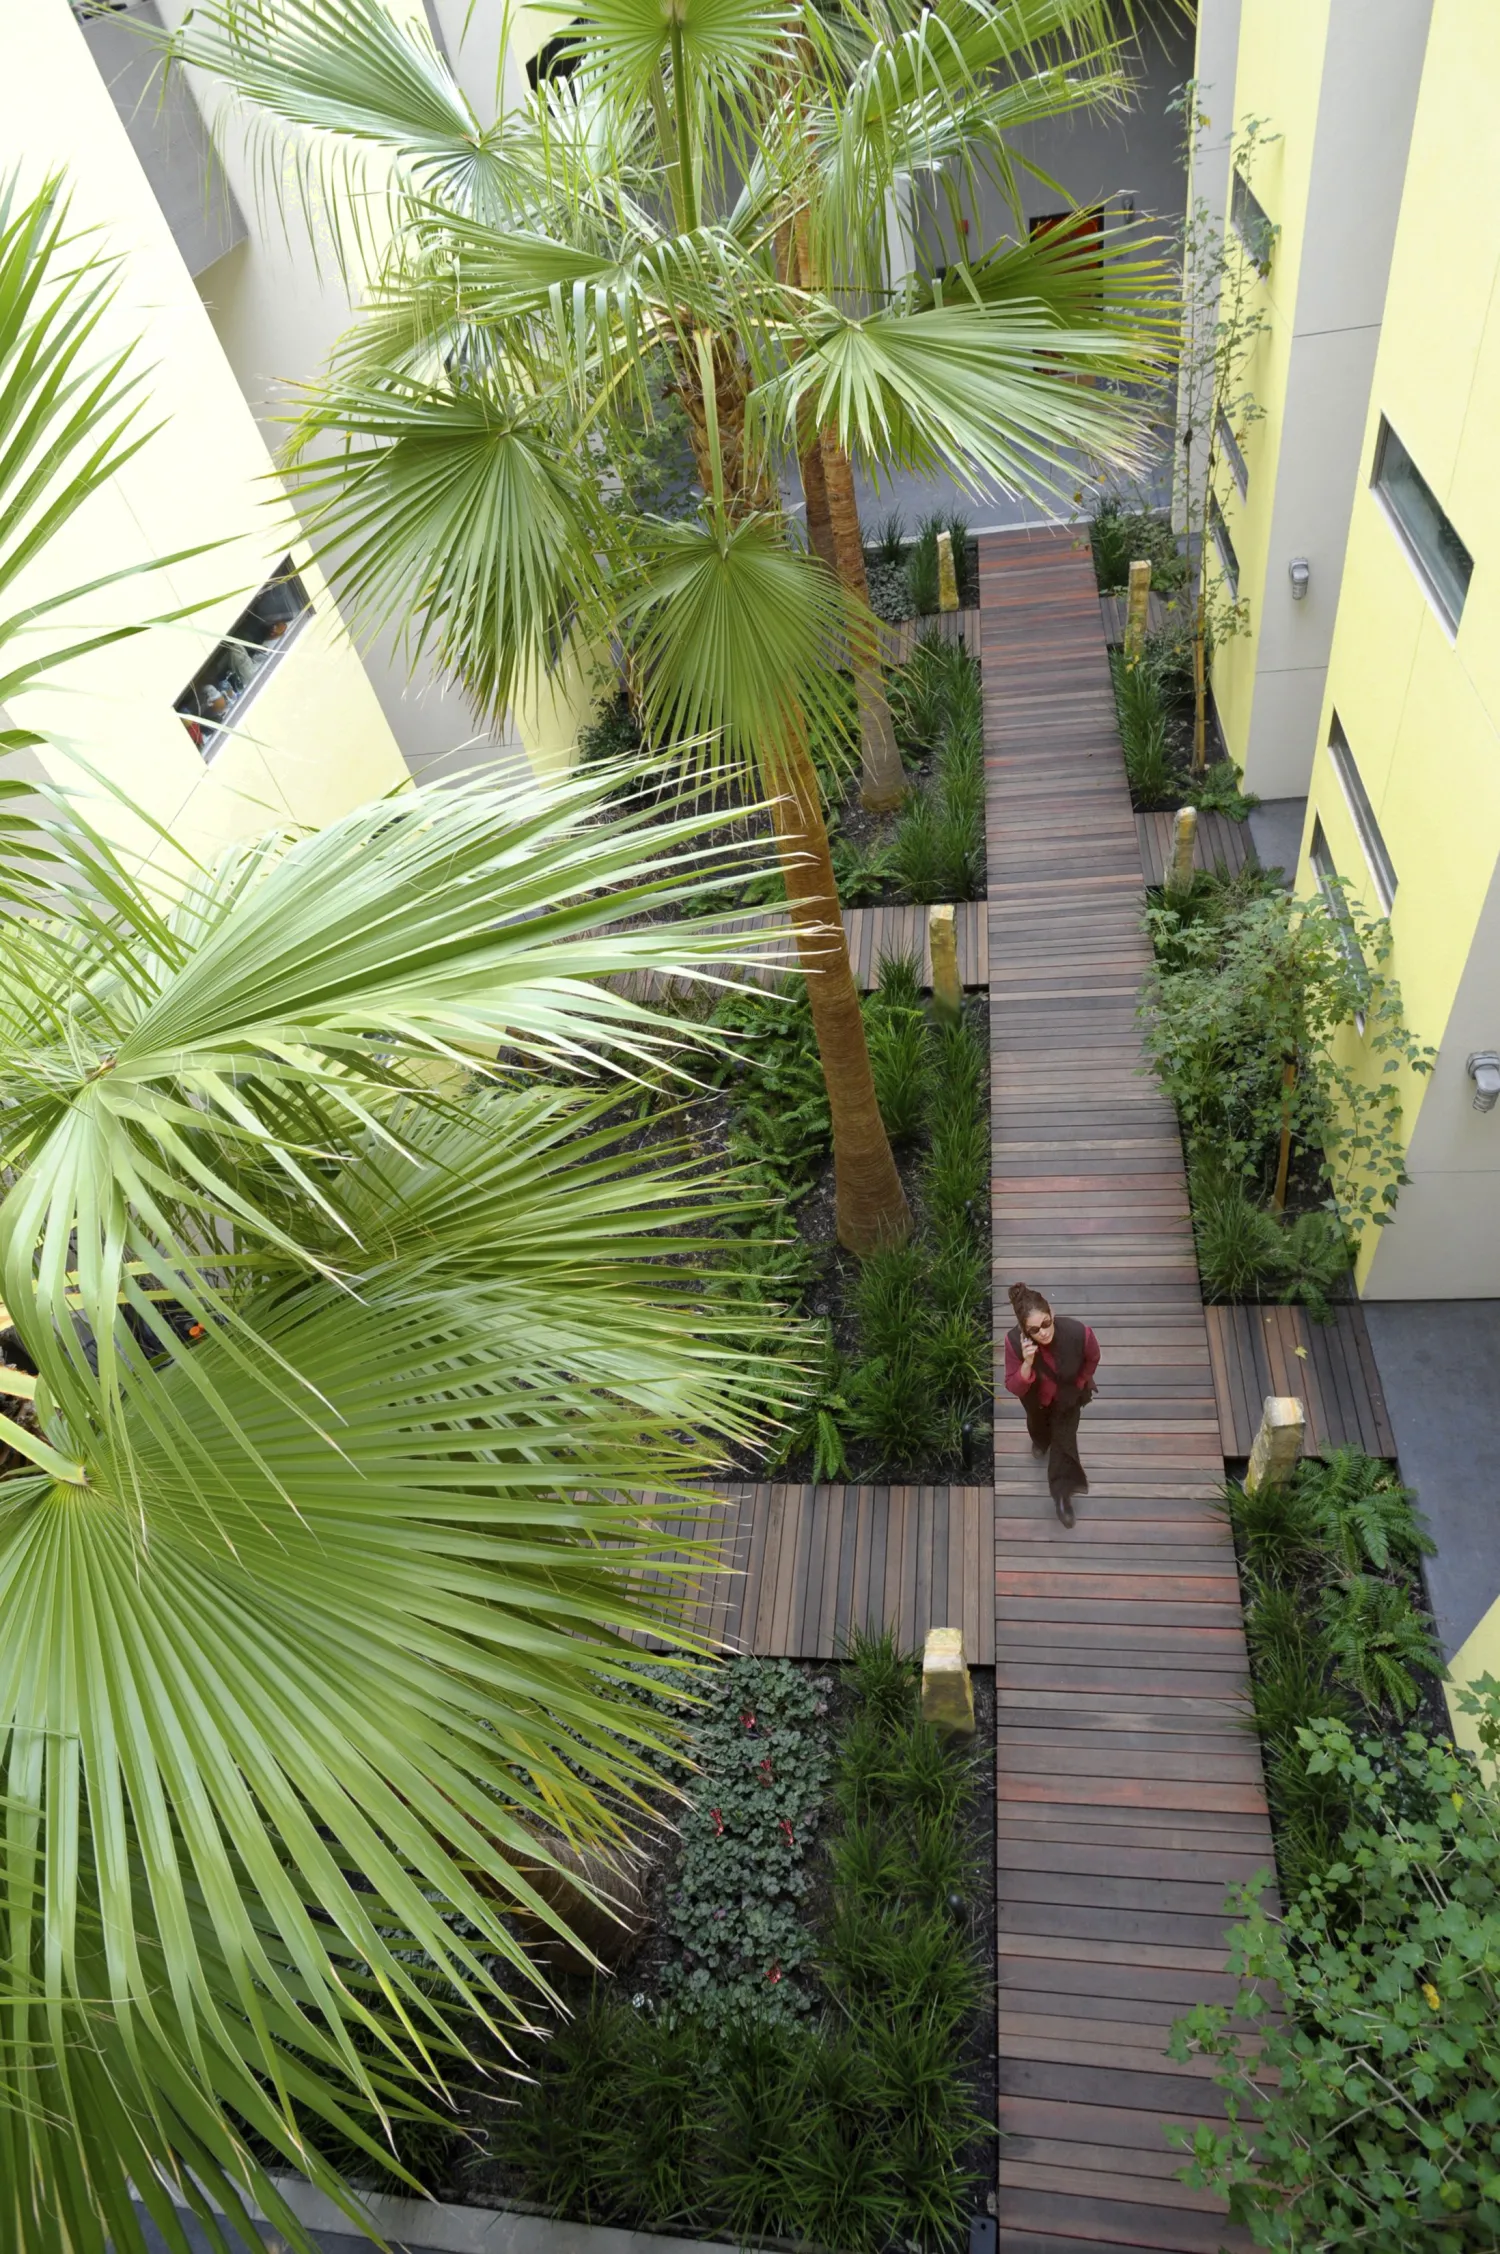 View of a courtyard from above at Pacific Cannery Lofts in Oakland, California.